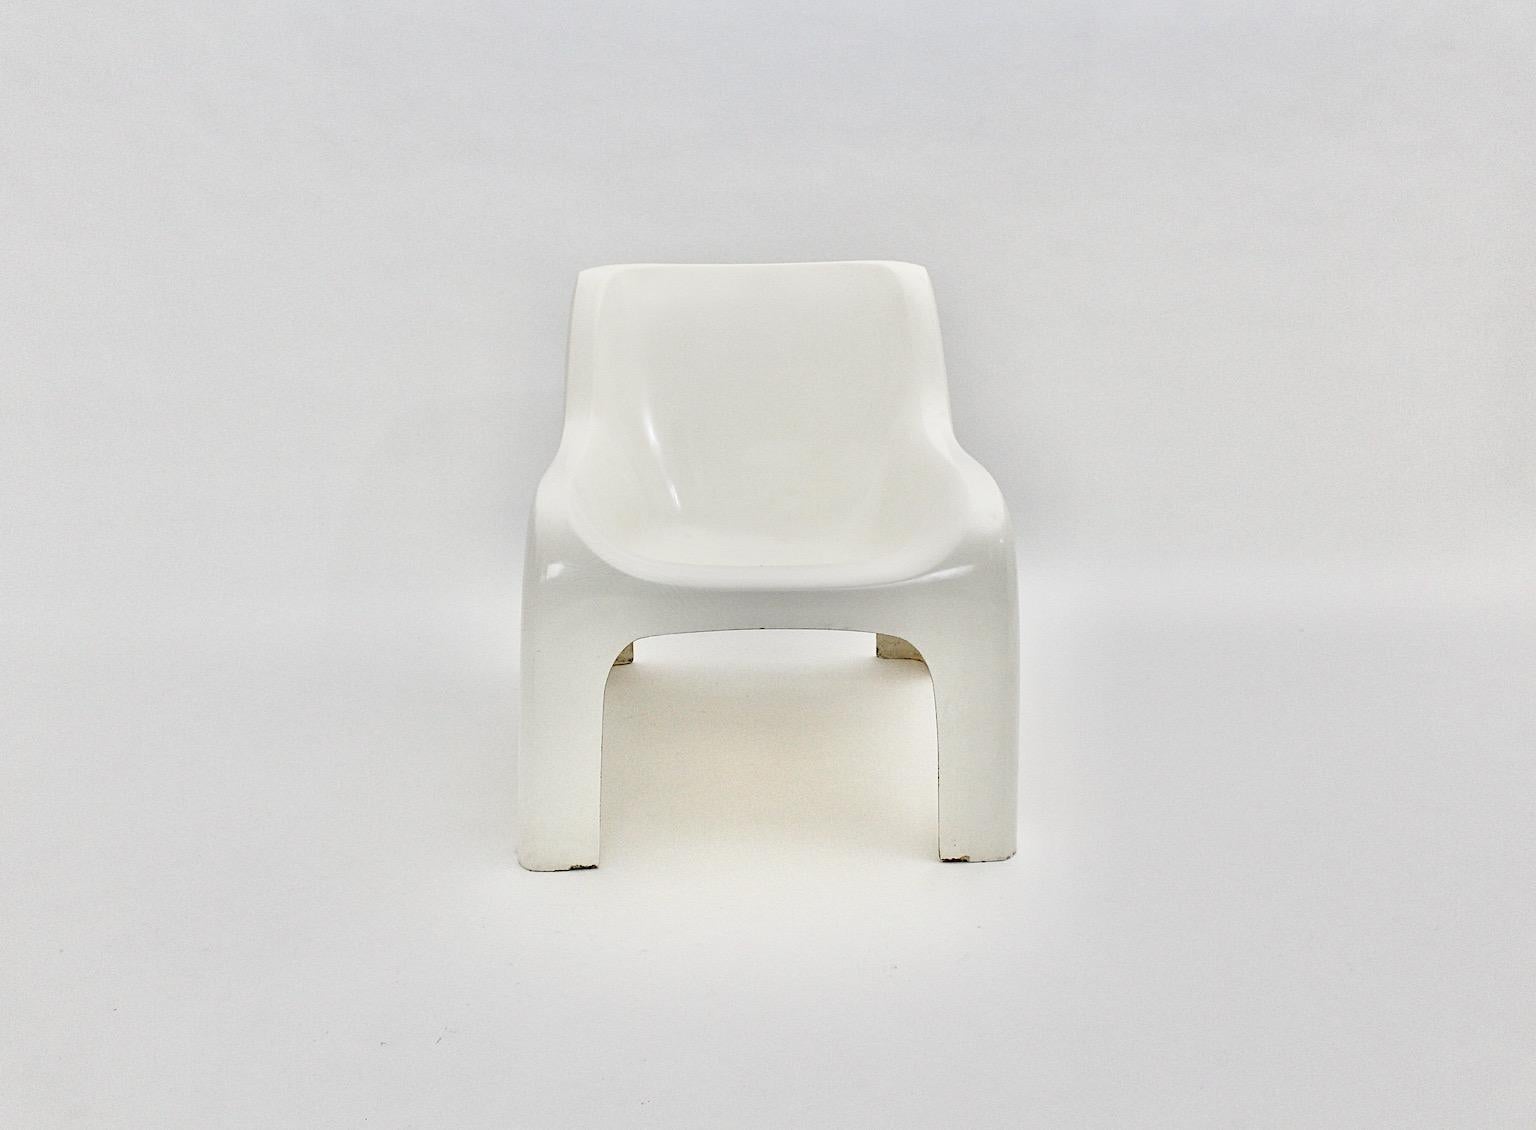 Space Age vintage lounge chair model Anatomia from plastic in white color by Ahti Kotikoski for Asko 1968, Finland.
A beautiful vintage lounge chair from the space age era designed by Ahti Kotikoski for Asko, Finland. 
Won an award by the exhibition